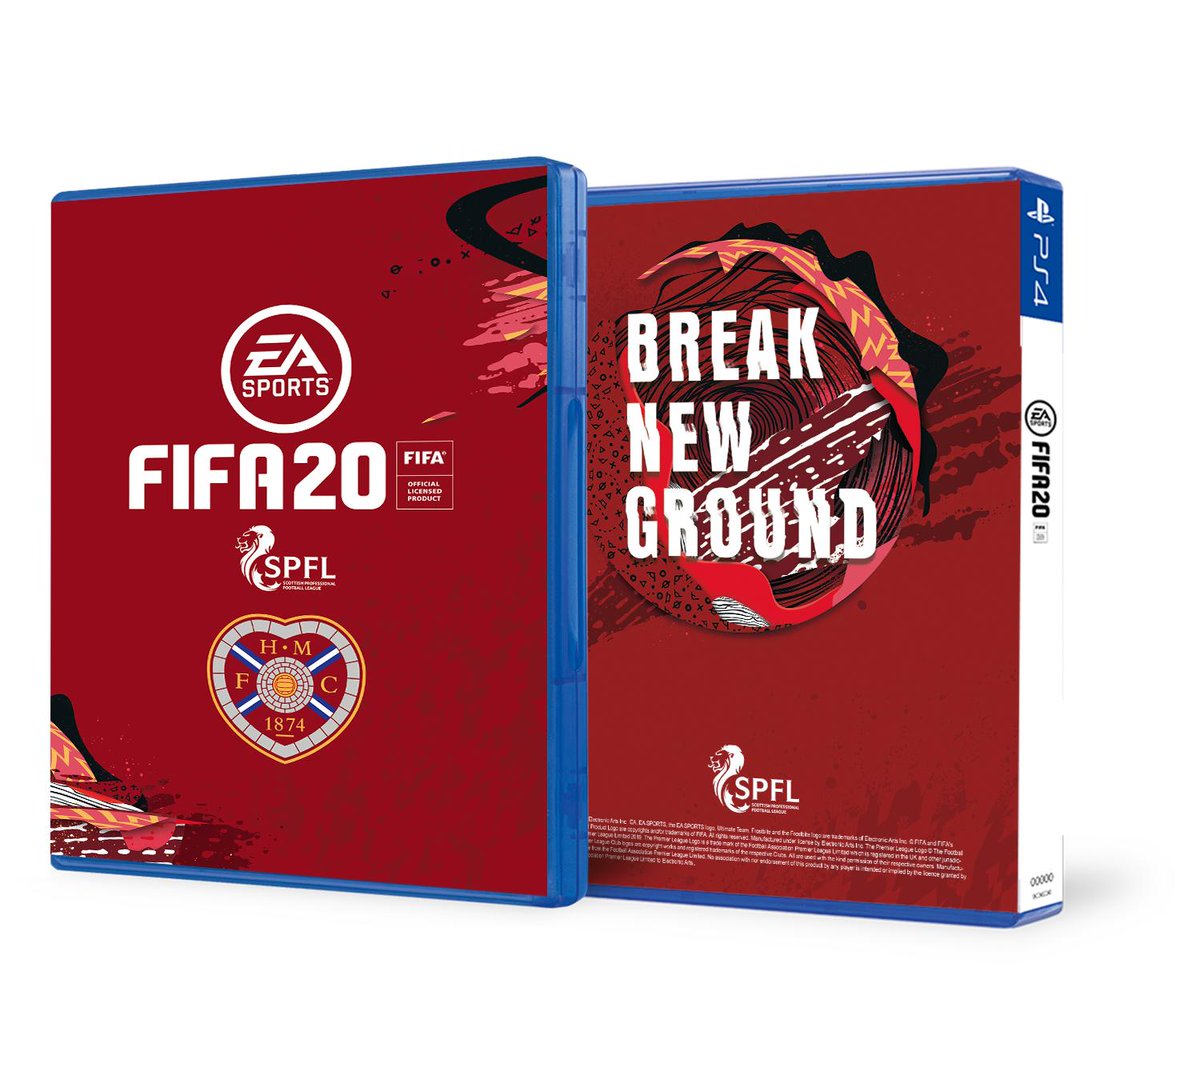 🎮 #FIFA20 is out now and we've got our hands on some special Hearts covered PS4 copies 👀 For your chance to win, simply RT and reply with the name of the Hearts player you'd like to sign your copy! ✍️